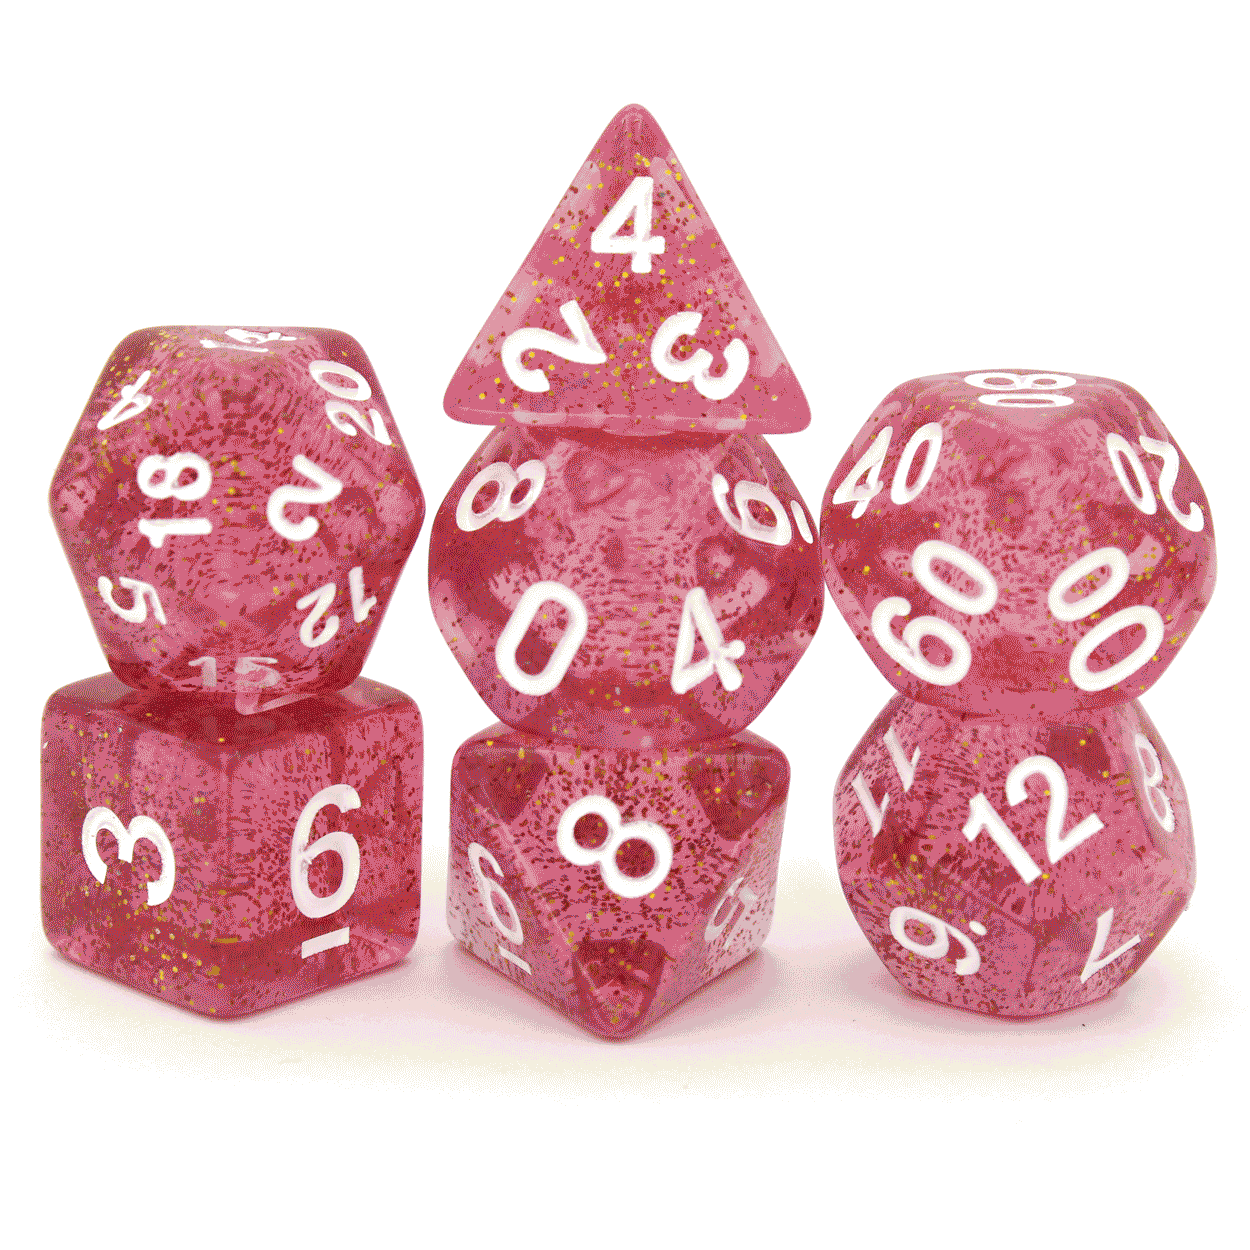 Mystery Starter Sets includes one of each of the following: d4, d6, d8, d10, d%, d12, d20. All dice sets are polymer and in the standard, 16mm size.